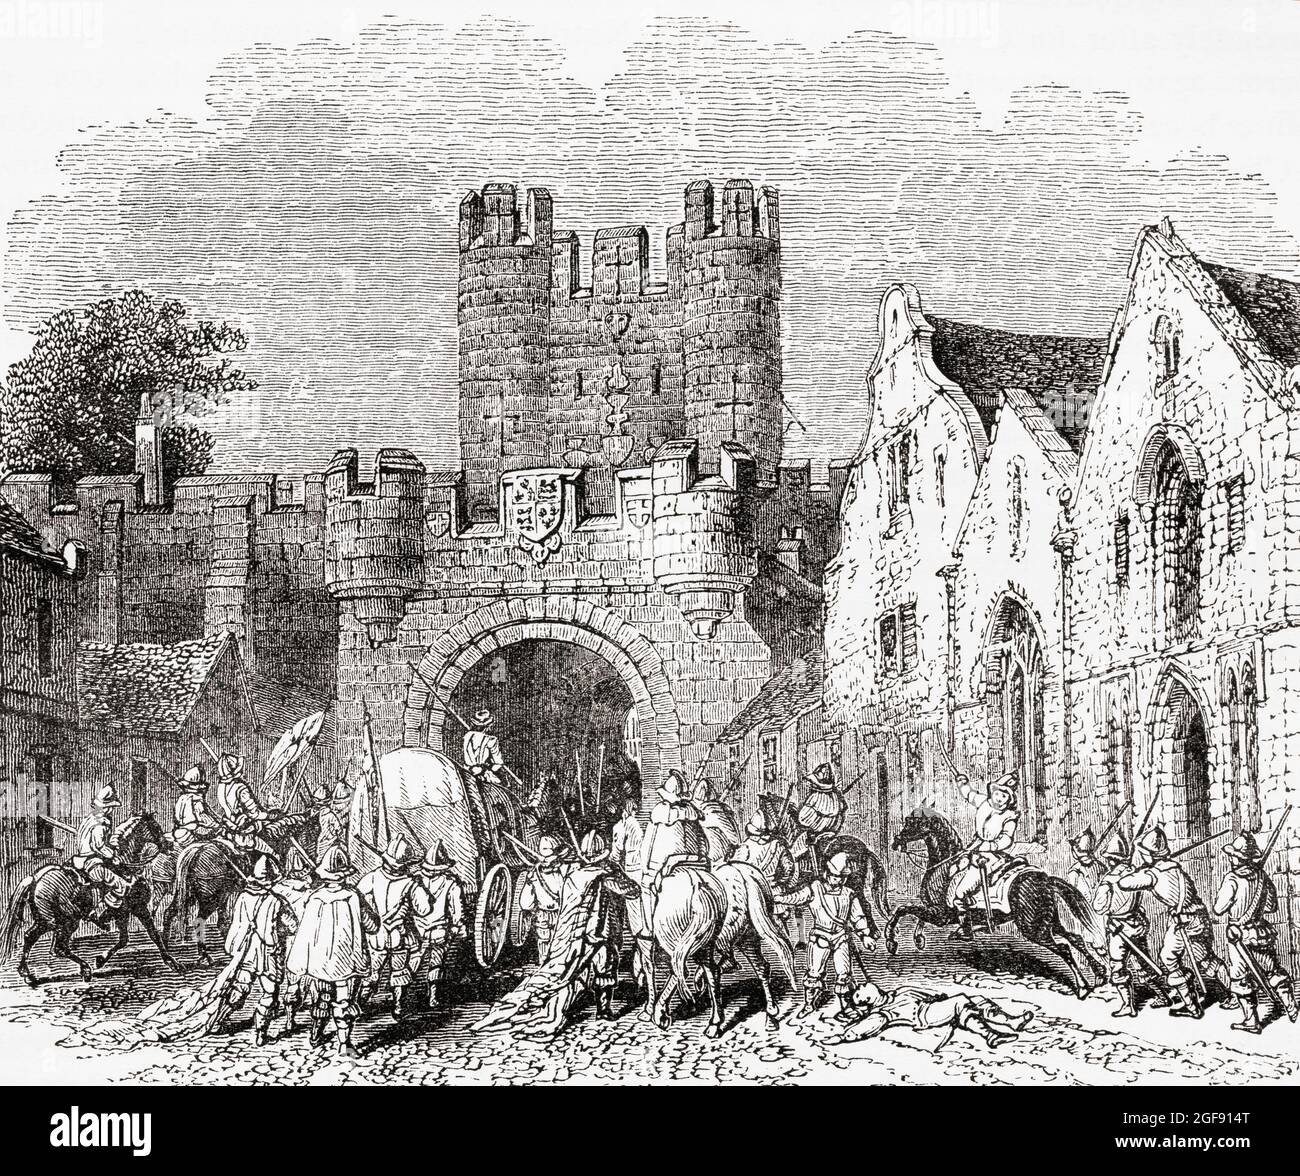 Micklegate Bar, York, England seen here at the time of the English Civil War.  It was the traditional ceremonial gate for monarchs entering the city who touched the state sword when entering the gate.  From Picturesque England its Landmarks and Historic Haunts, published, 1891 Stock Photo